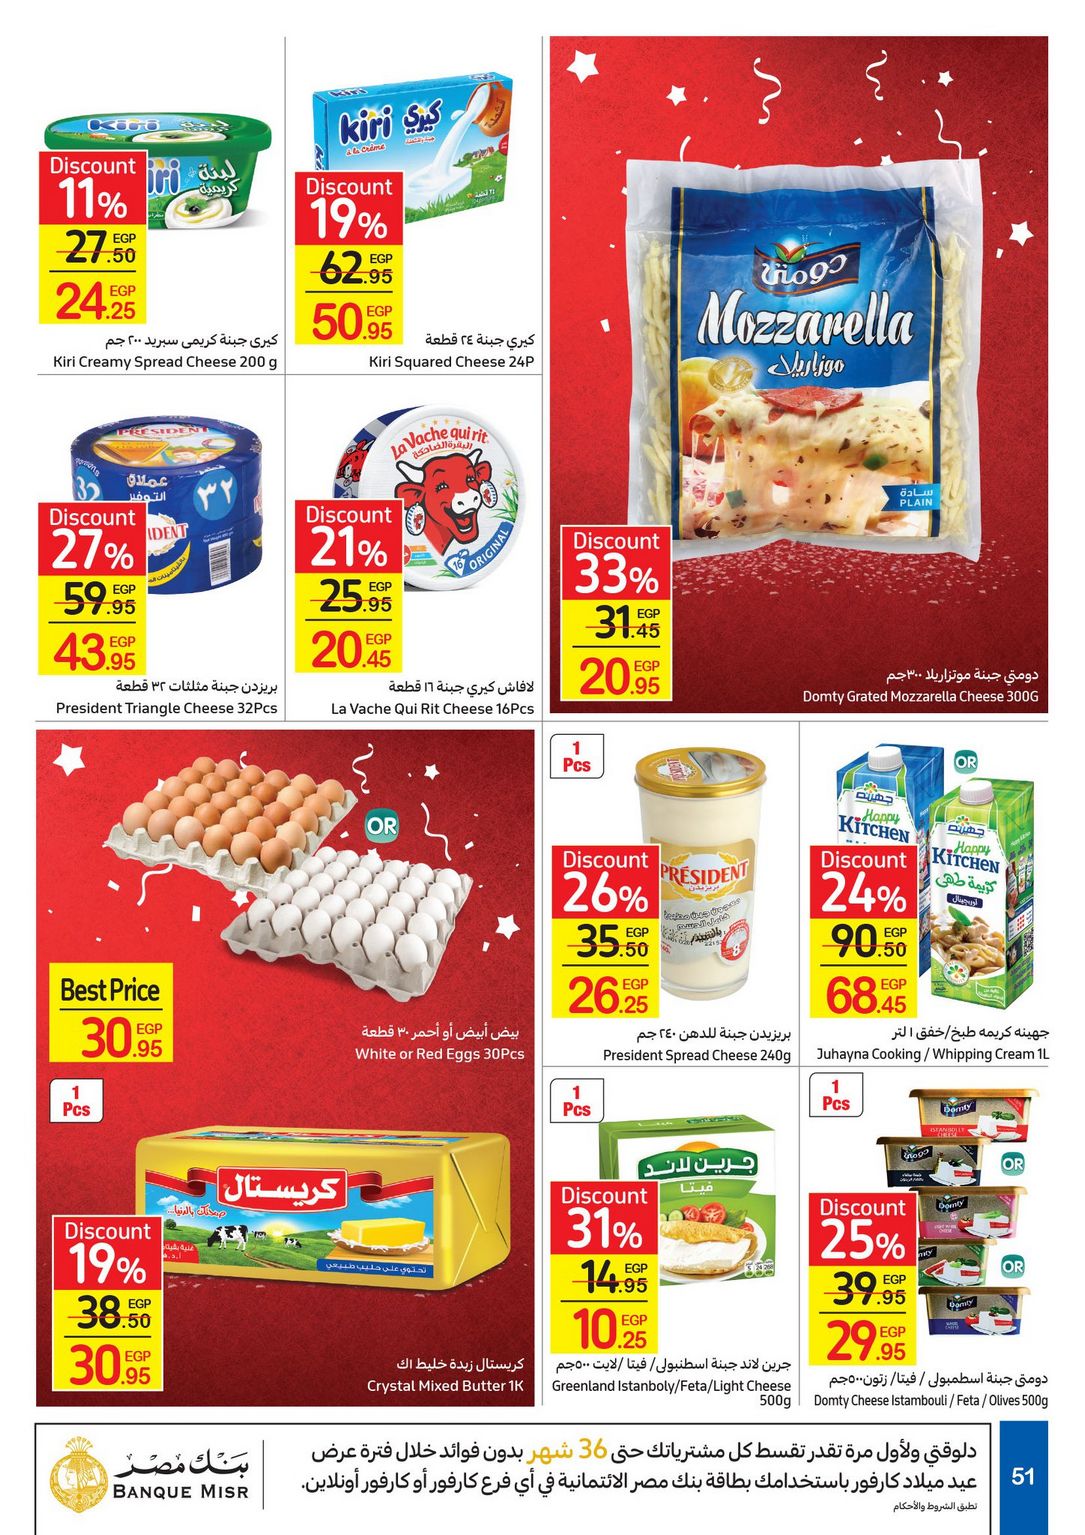 Carrefour Anniversary Offers till 18/2/2021 | Carrefour Egypt 53